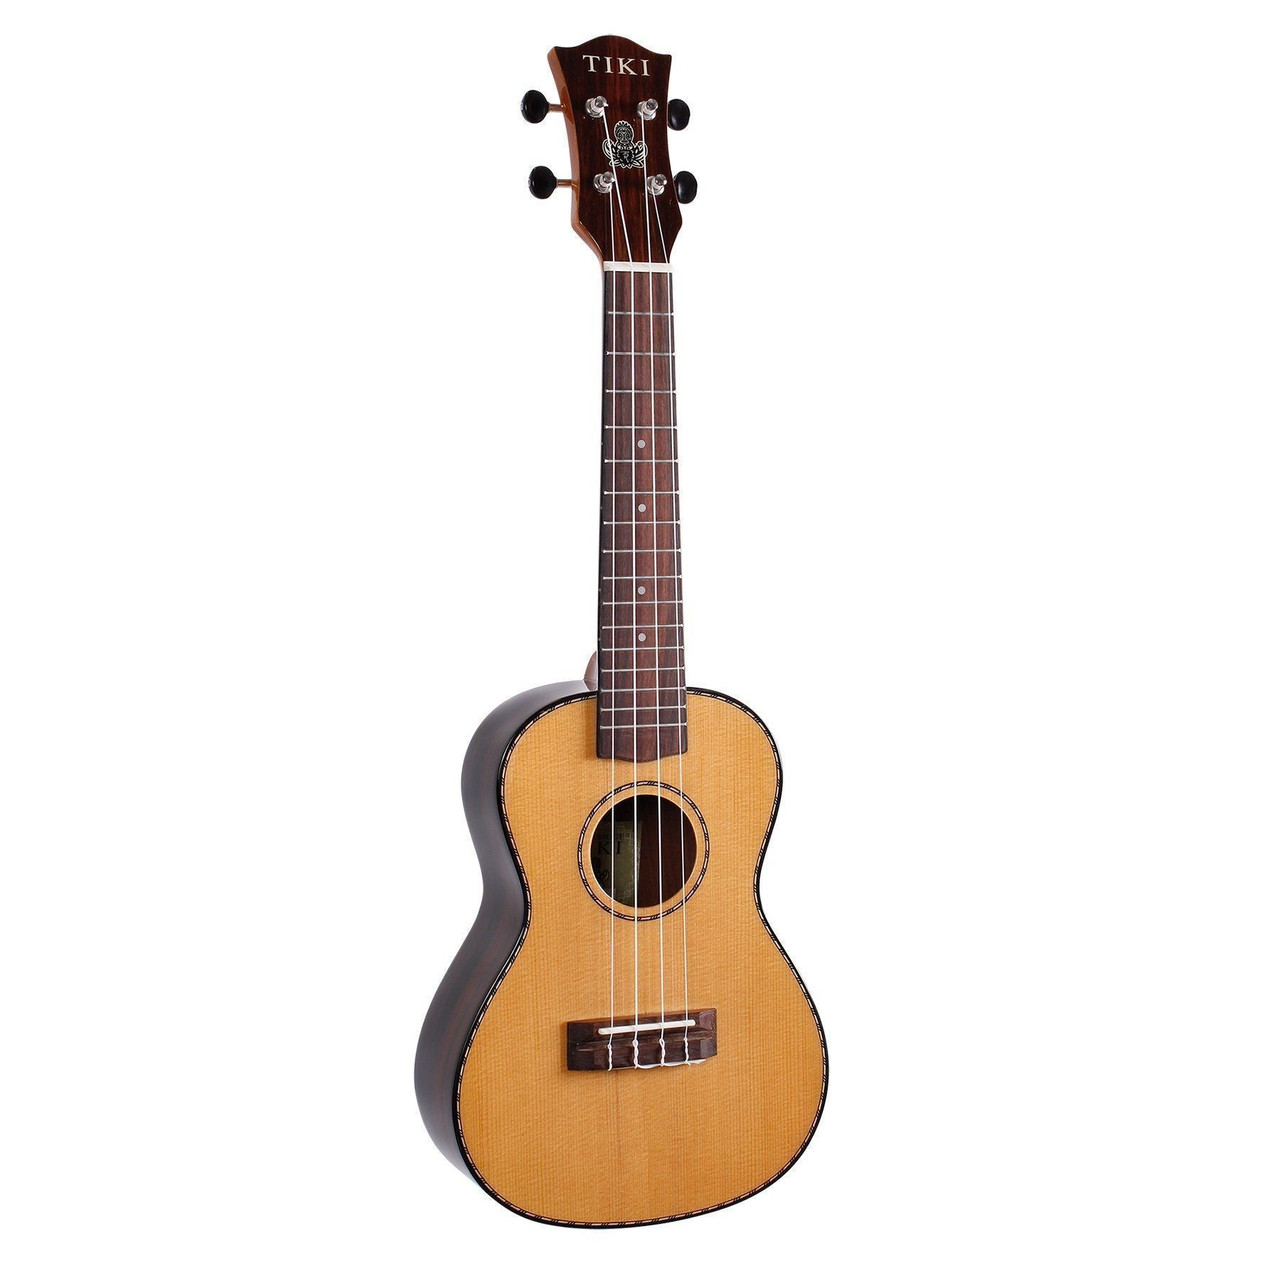 https://cdn.shopify.com/s/files/1/1636/6967/products/Tiki-22-Series-Spruce-Solid-Top-Concert-Ukulele-with-Hard-Case-Natural-Gloss-TSC-22-NGL-3_f4722a65-838a-4aaa-98db-12824775a56c.jpg?v=1643136551